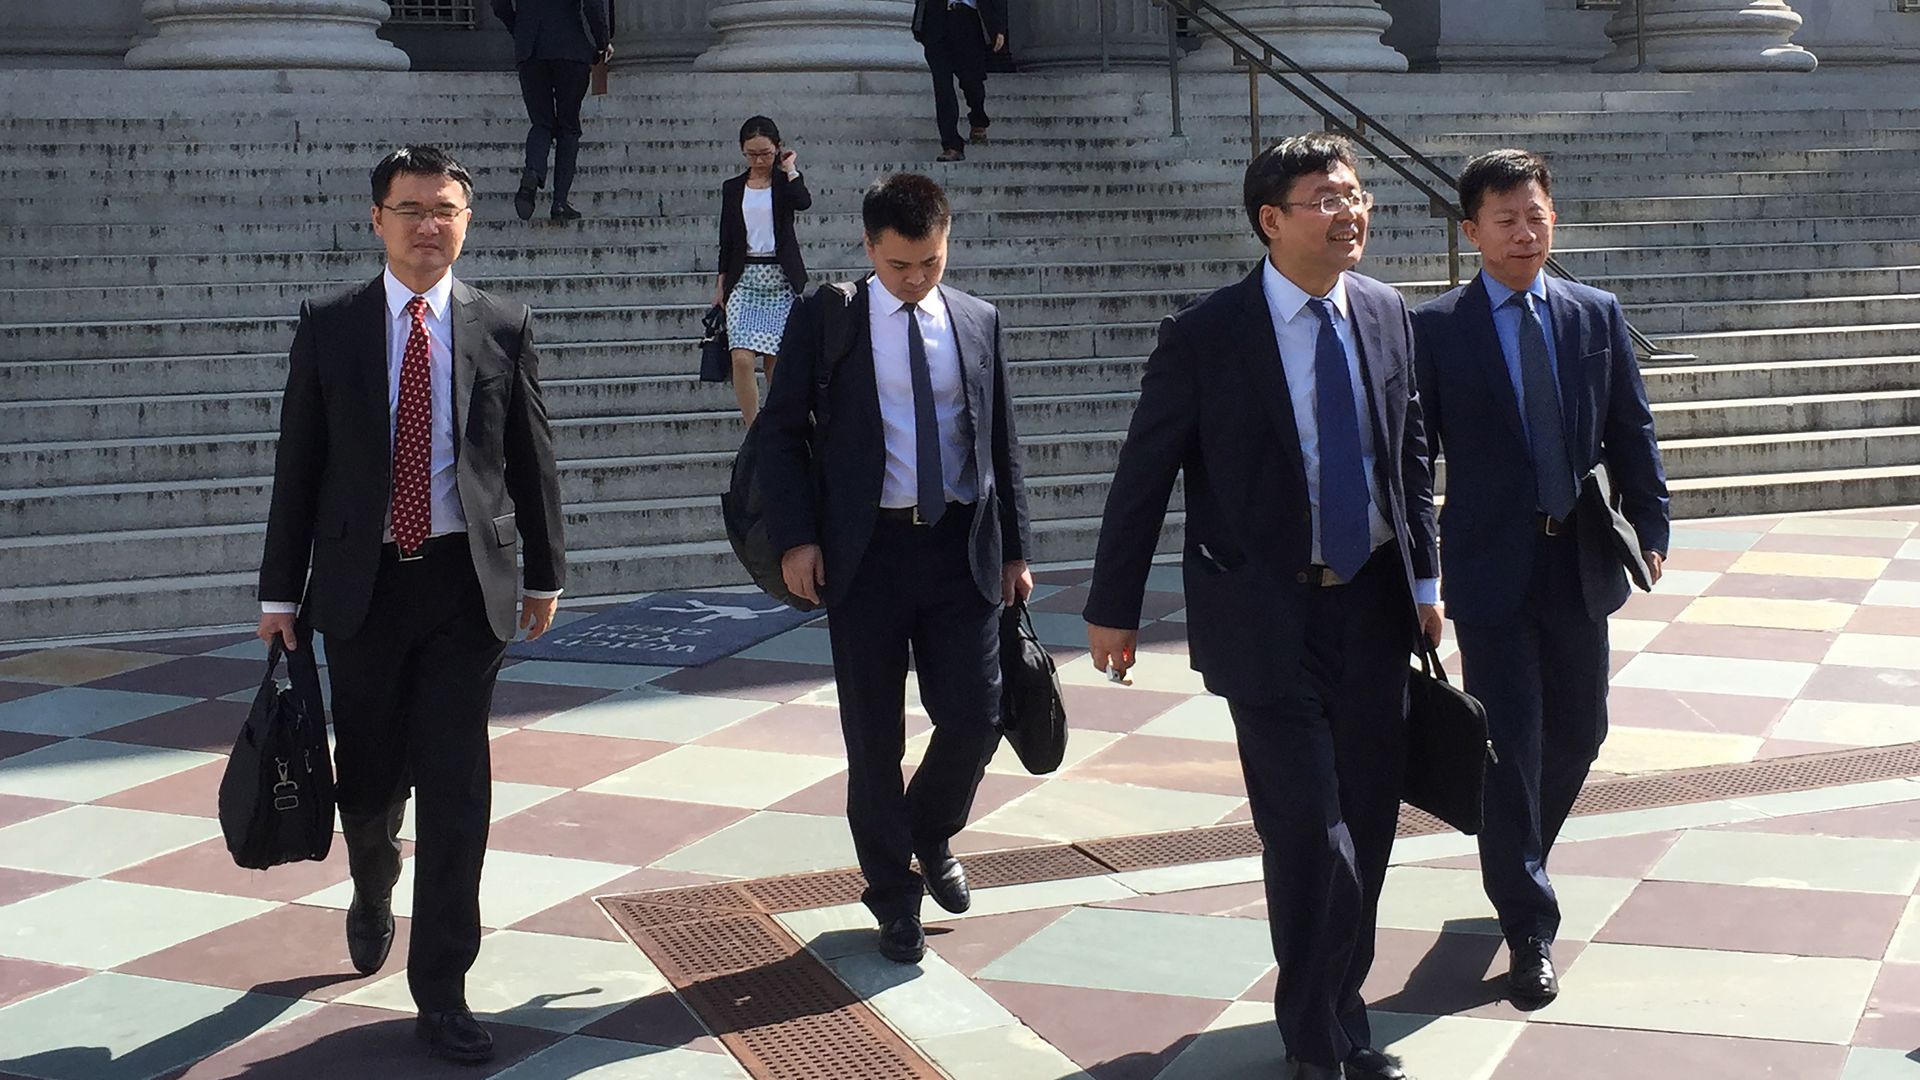 Photo of members of China trade delegation leaving unsuccessful meeting in D.C.